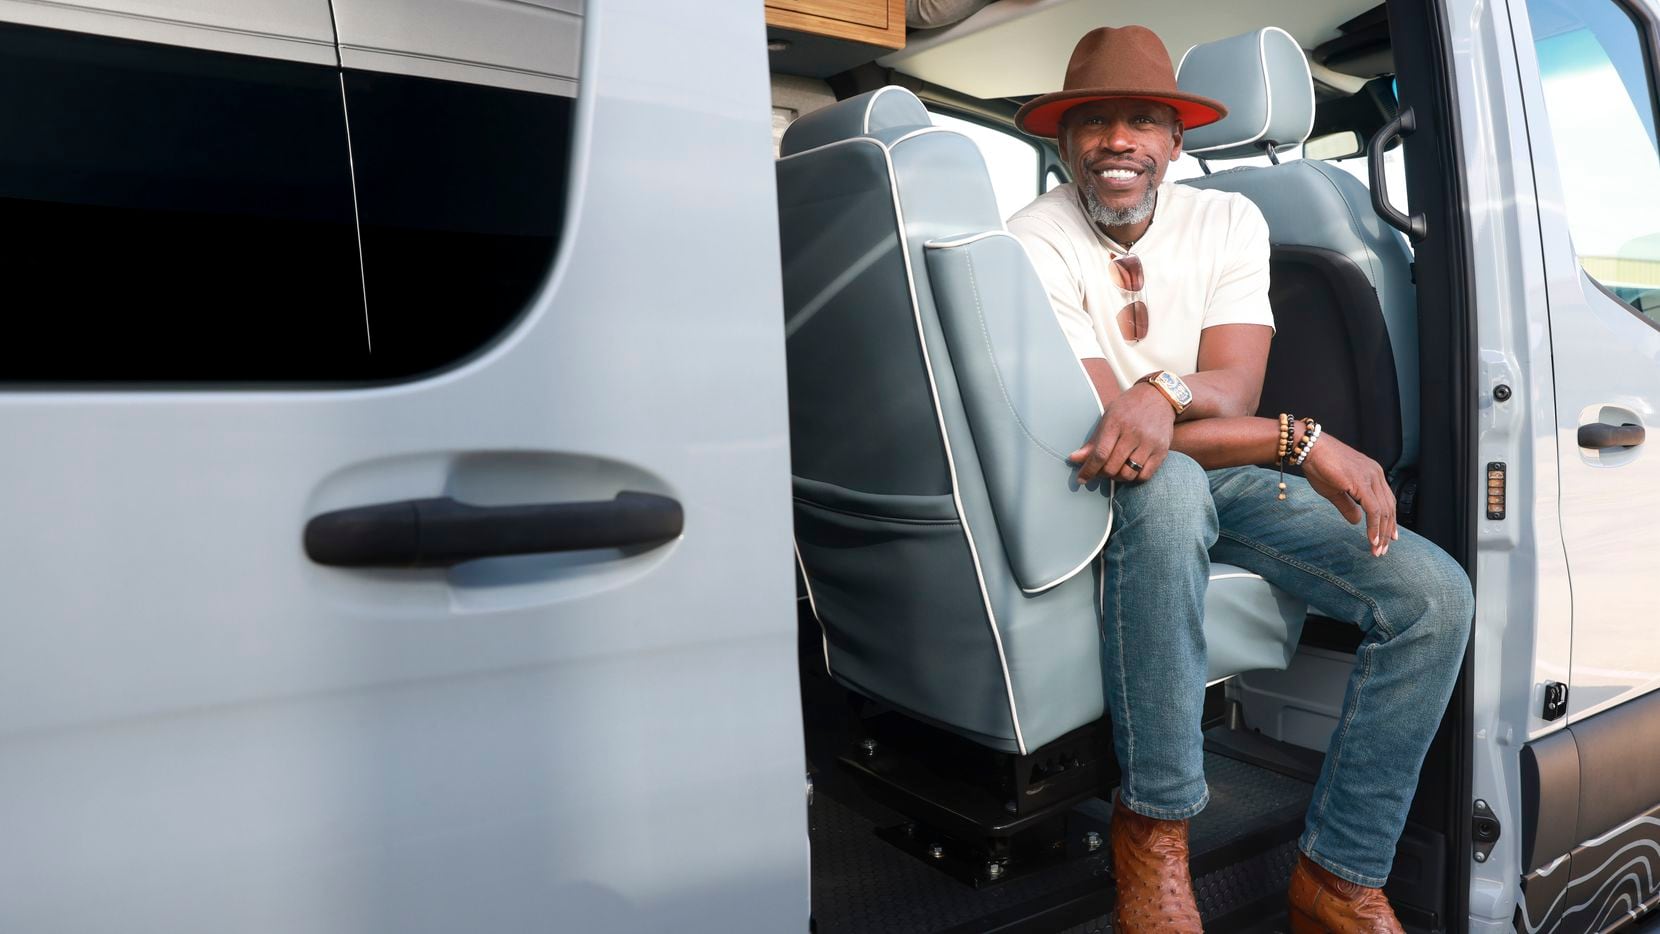 Co-owner Benny Black sits inside a converted Mercedes-Benz sprinter van at Iconic Sprinters...